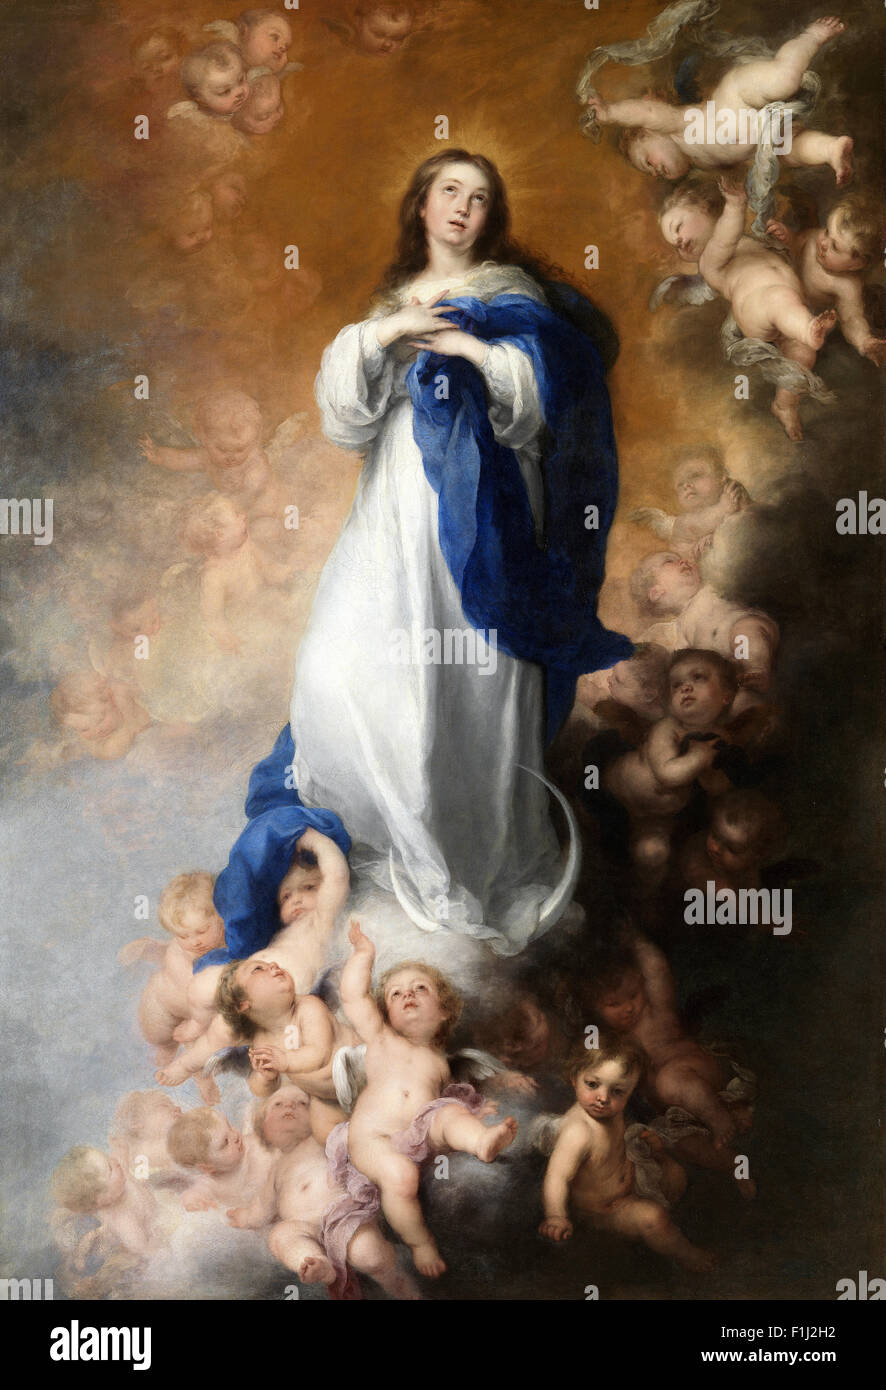 Bartolomé Esteban Murillo - The Immaculate Conception of Los Venerables, or The Soult Immaculate Stock Photo